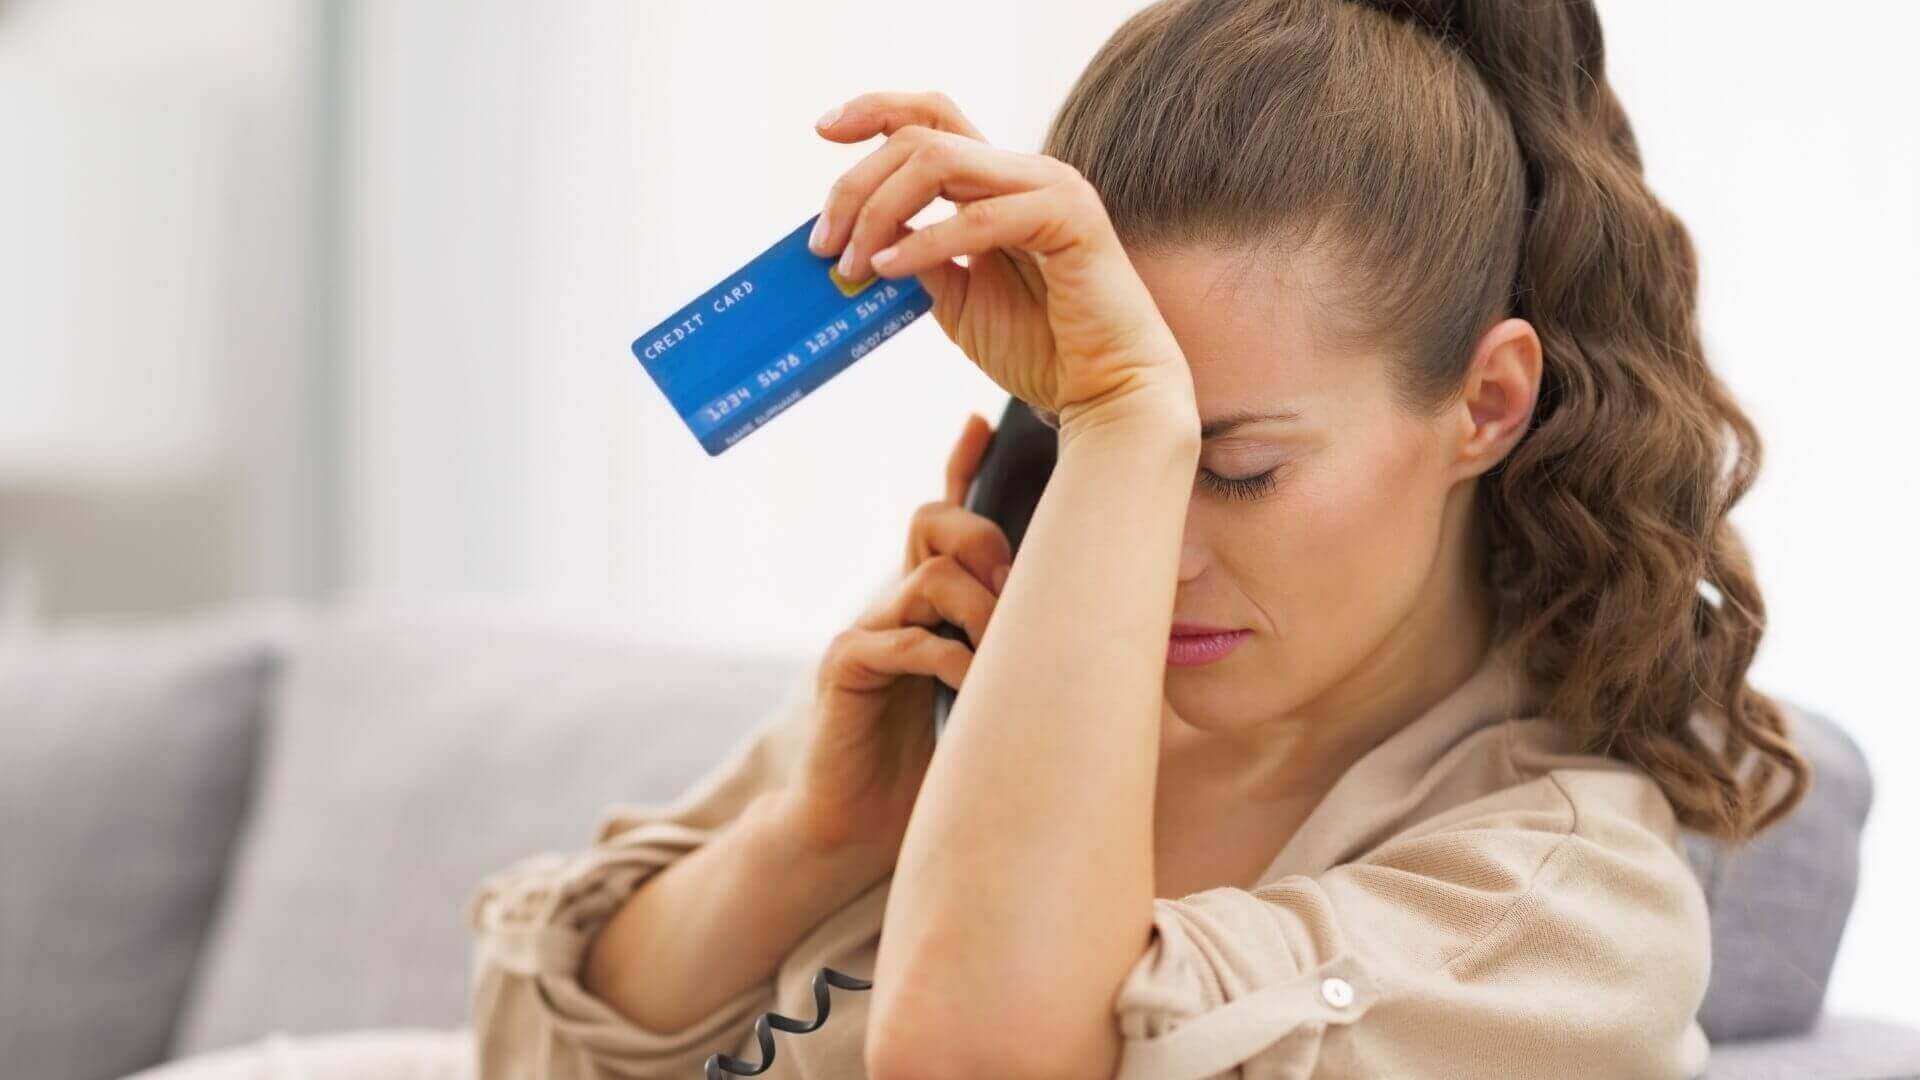 Woman holding a credit card looking stressed as she learns she was charged an overdraft fee because she didn't have overdraft protection